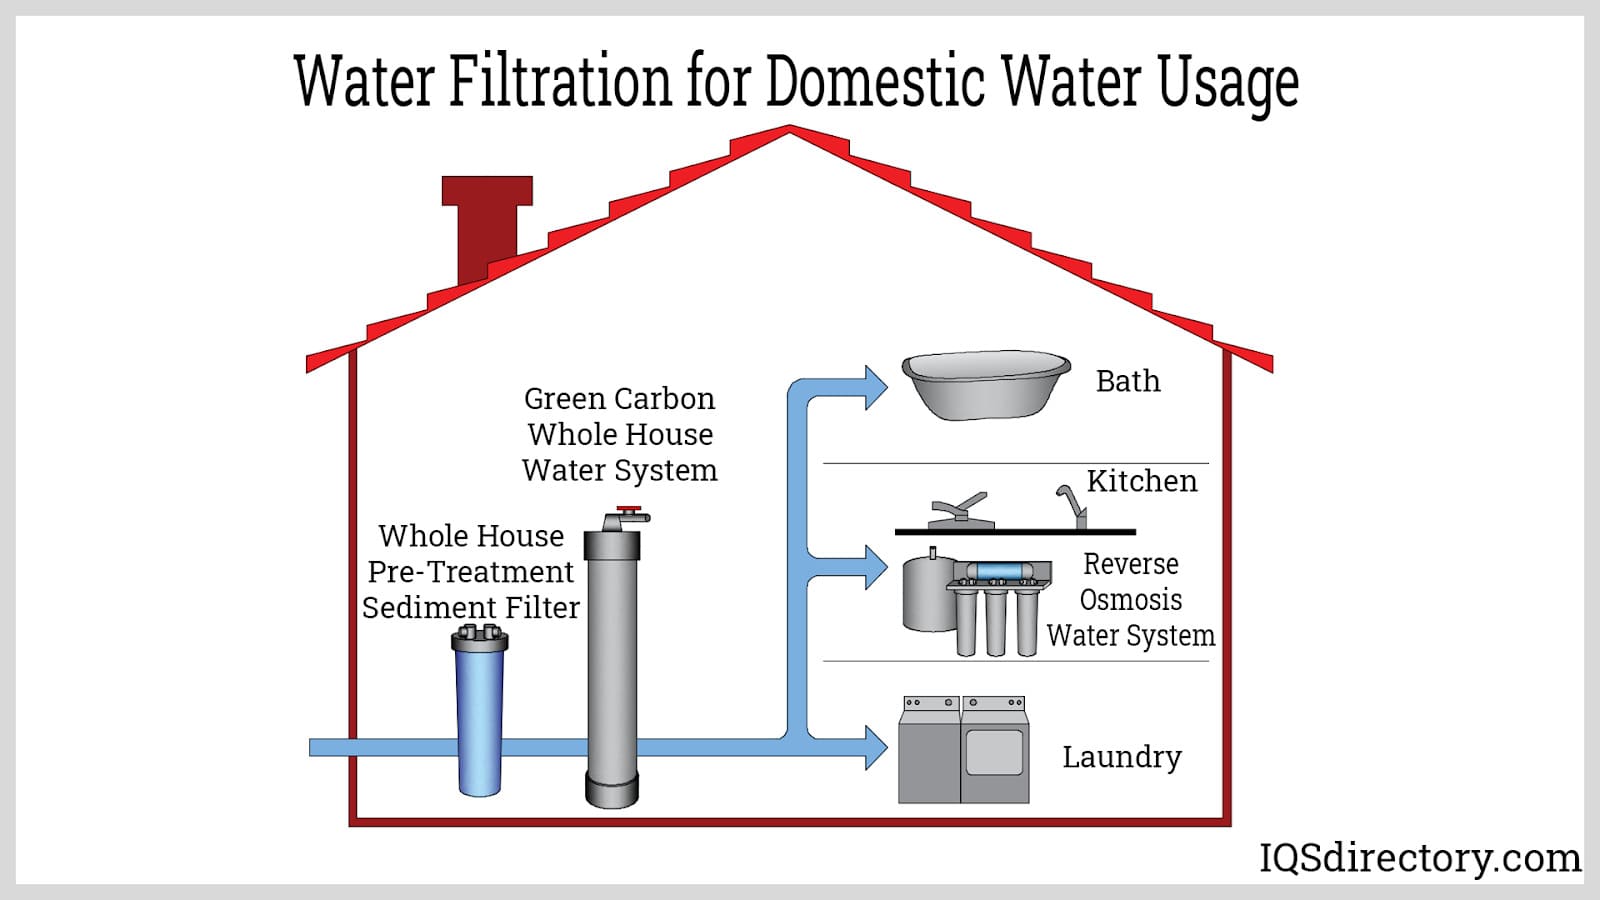 Water Filtration for Domestic Water Usage